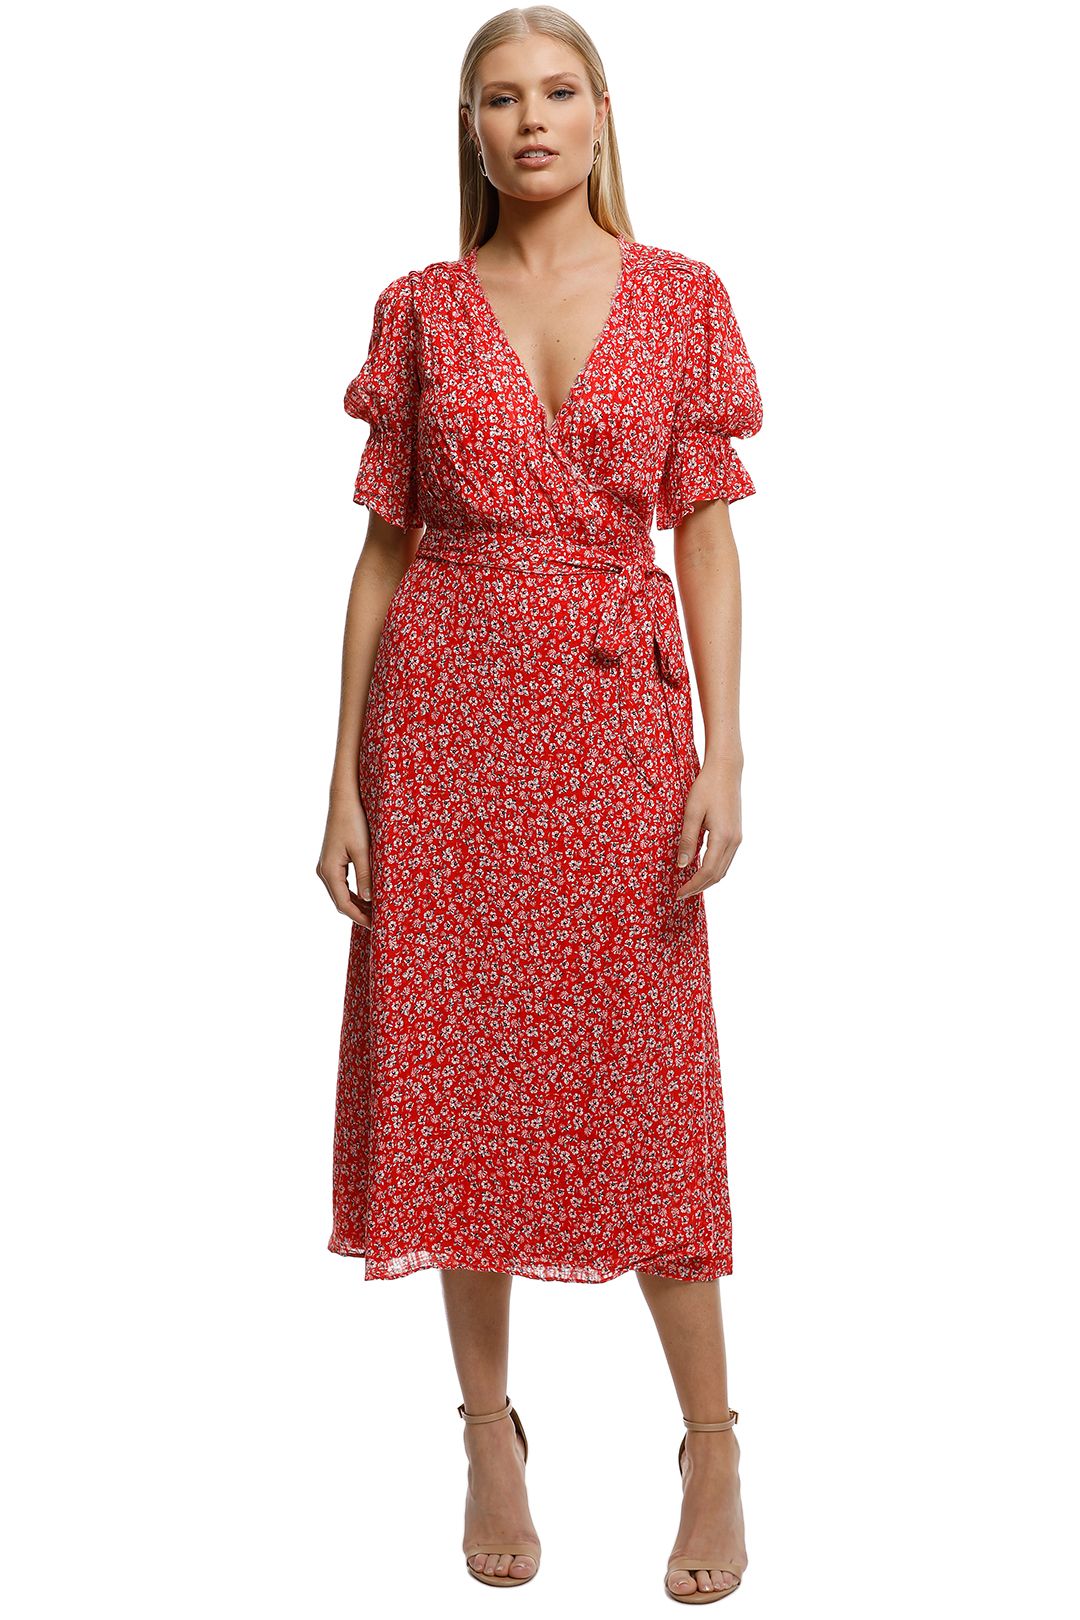 Stevie-May-Claret-Midi-Dress-Red-Micro-Floral-FrontB